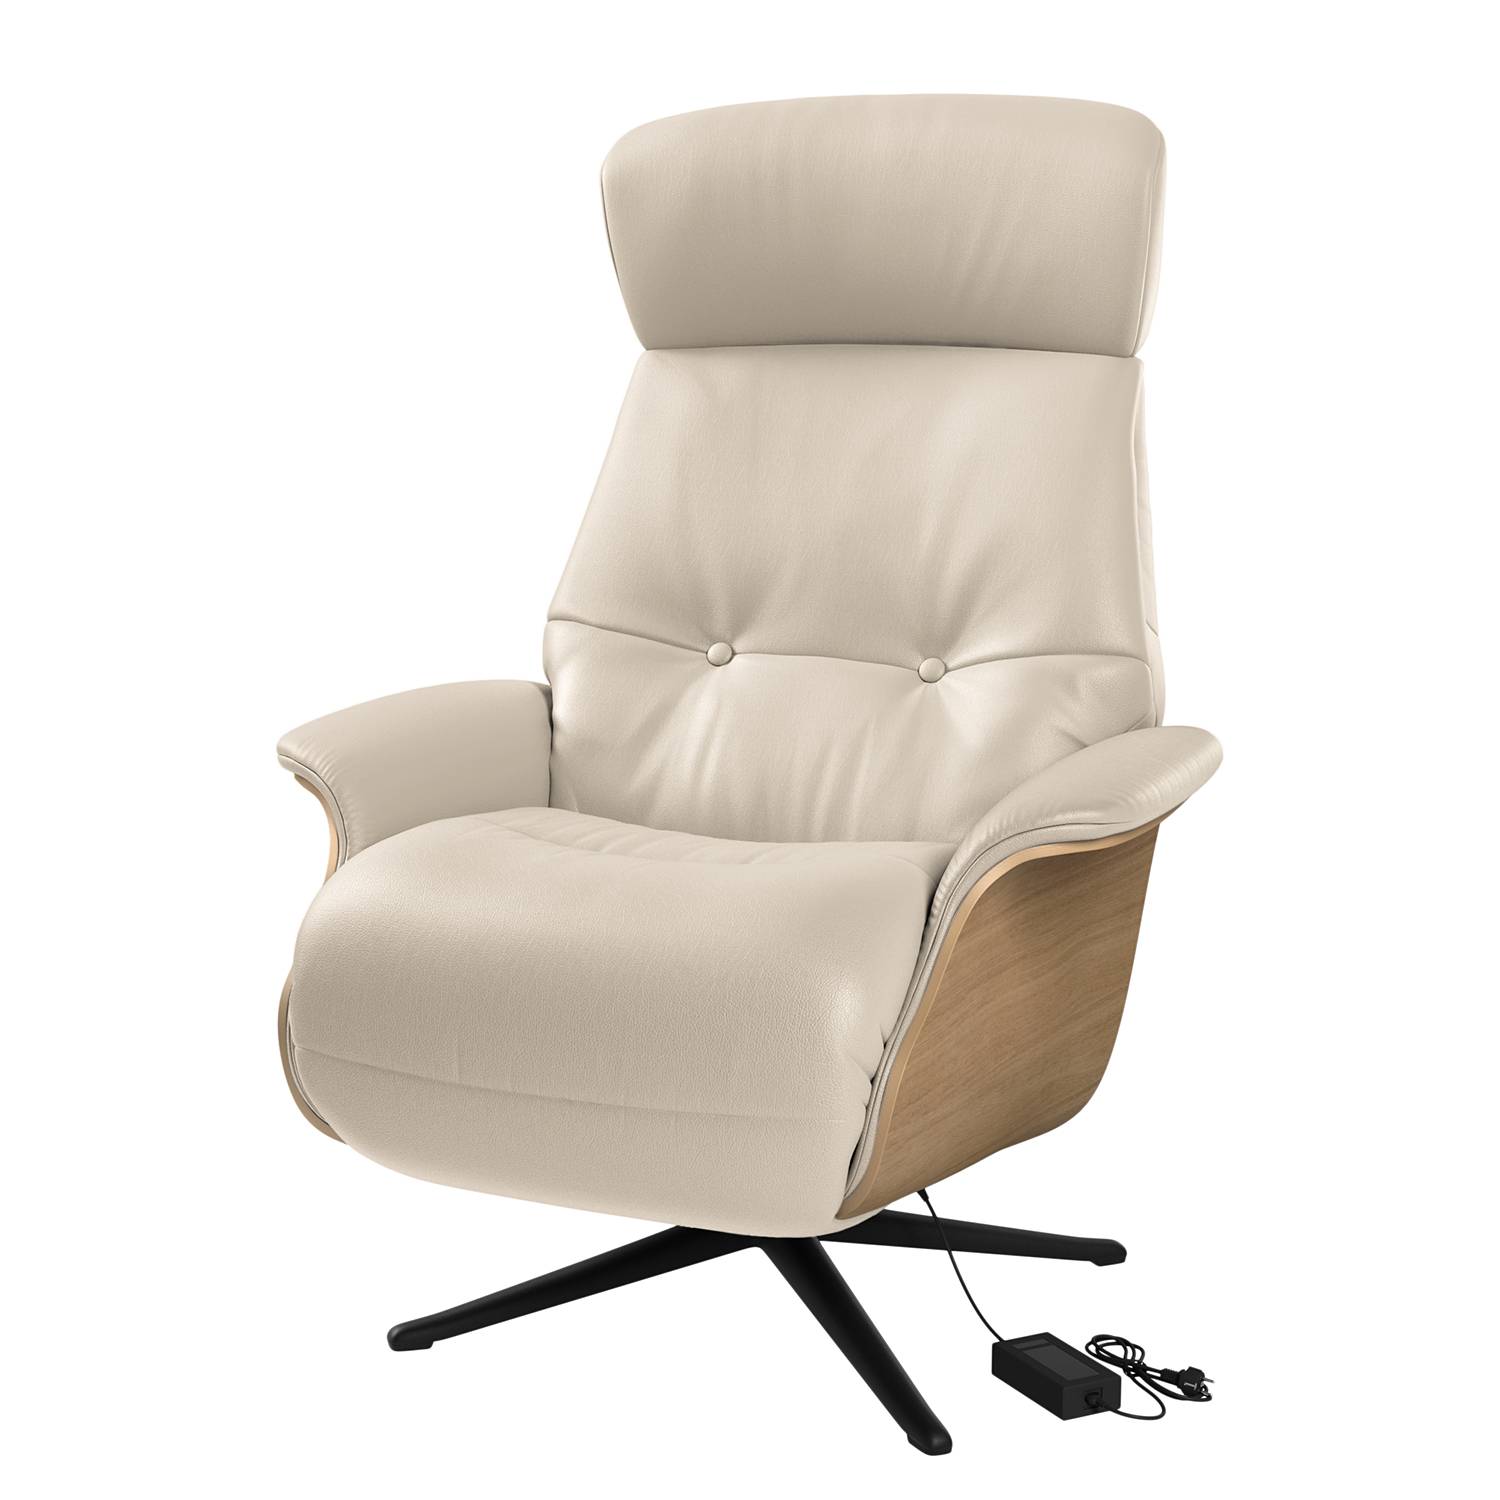 Image of Fauteuil relax Anderson VI 000000001000131431